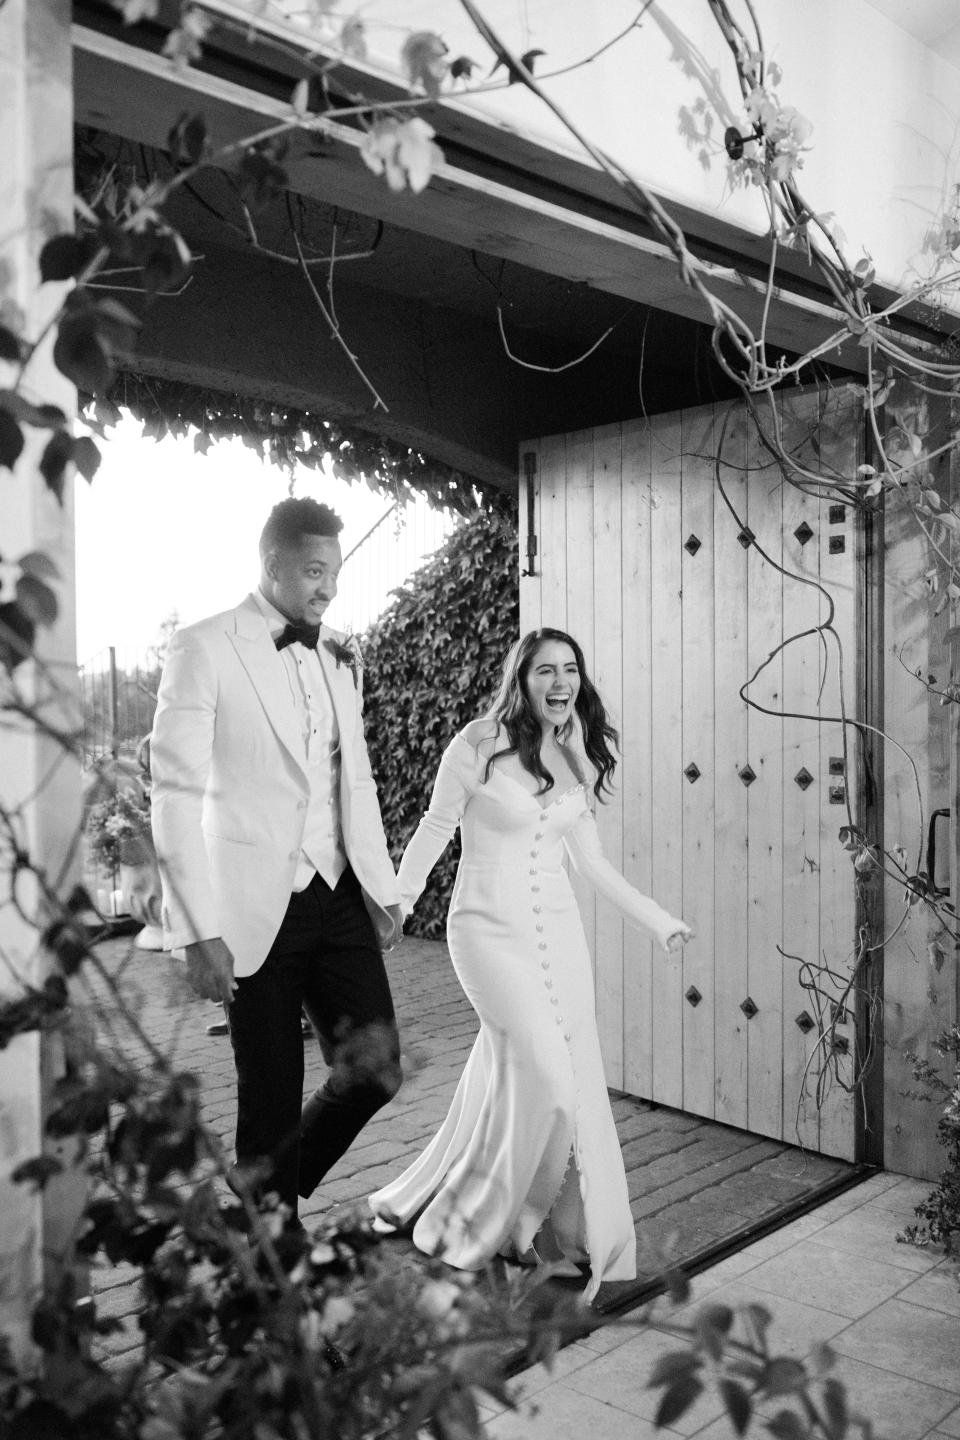 CJ McCollum and Elise Esposito’s Wedding Was an Intimate Affair in Oregon Wine Country